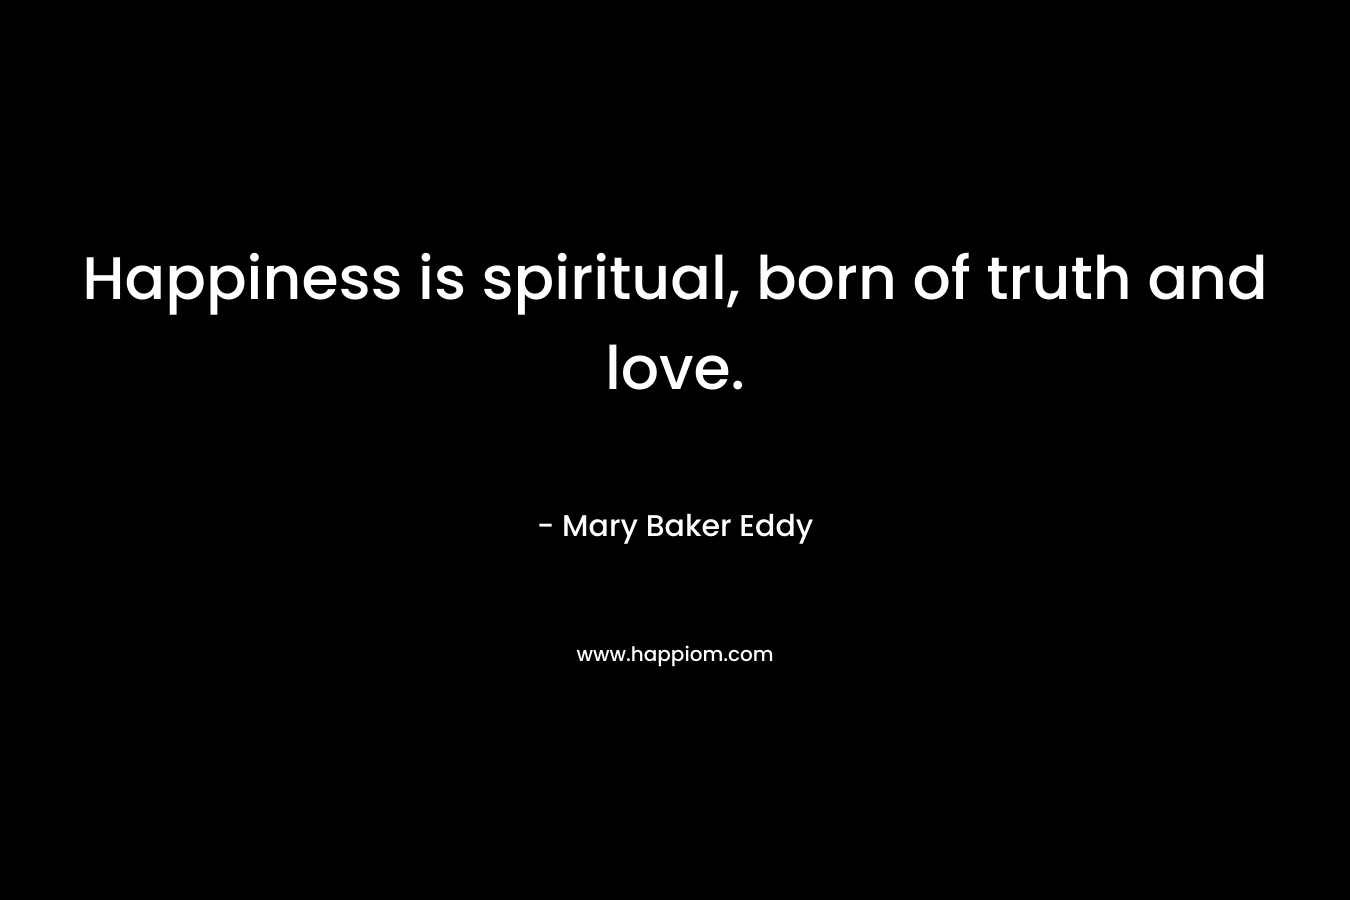 Happiness is spiritual, born of truth and love.